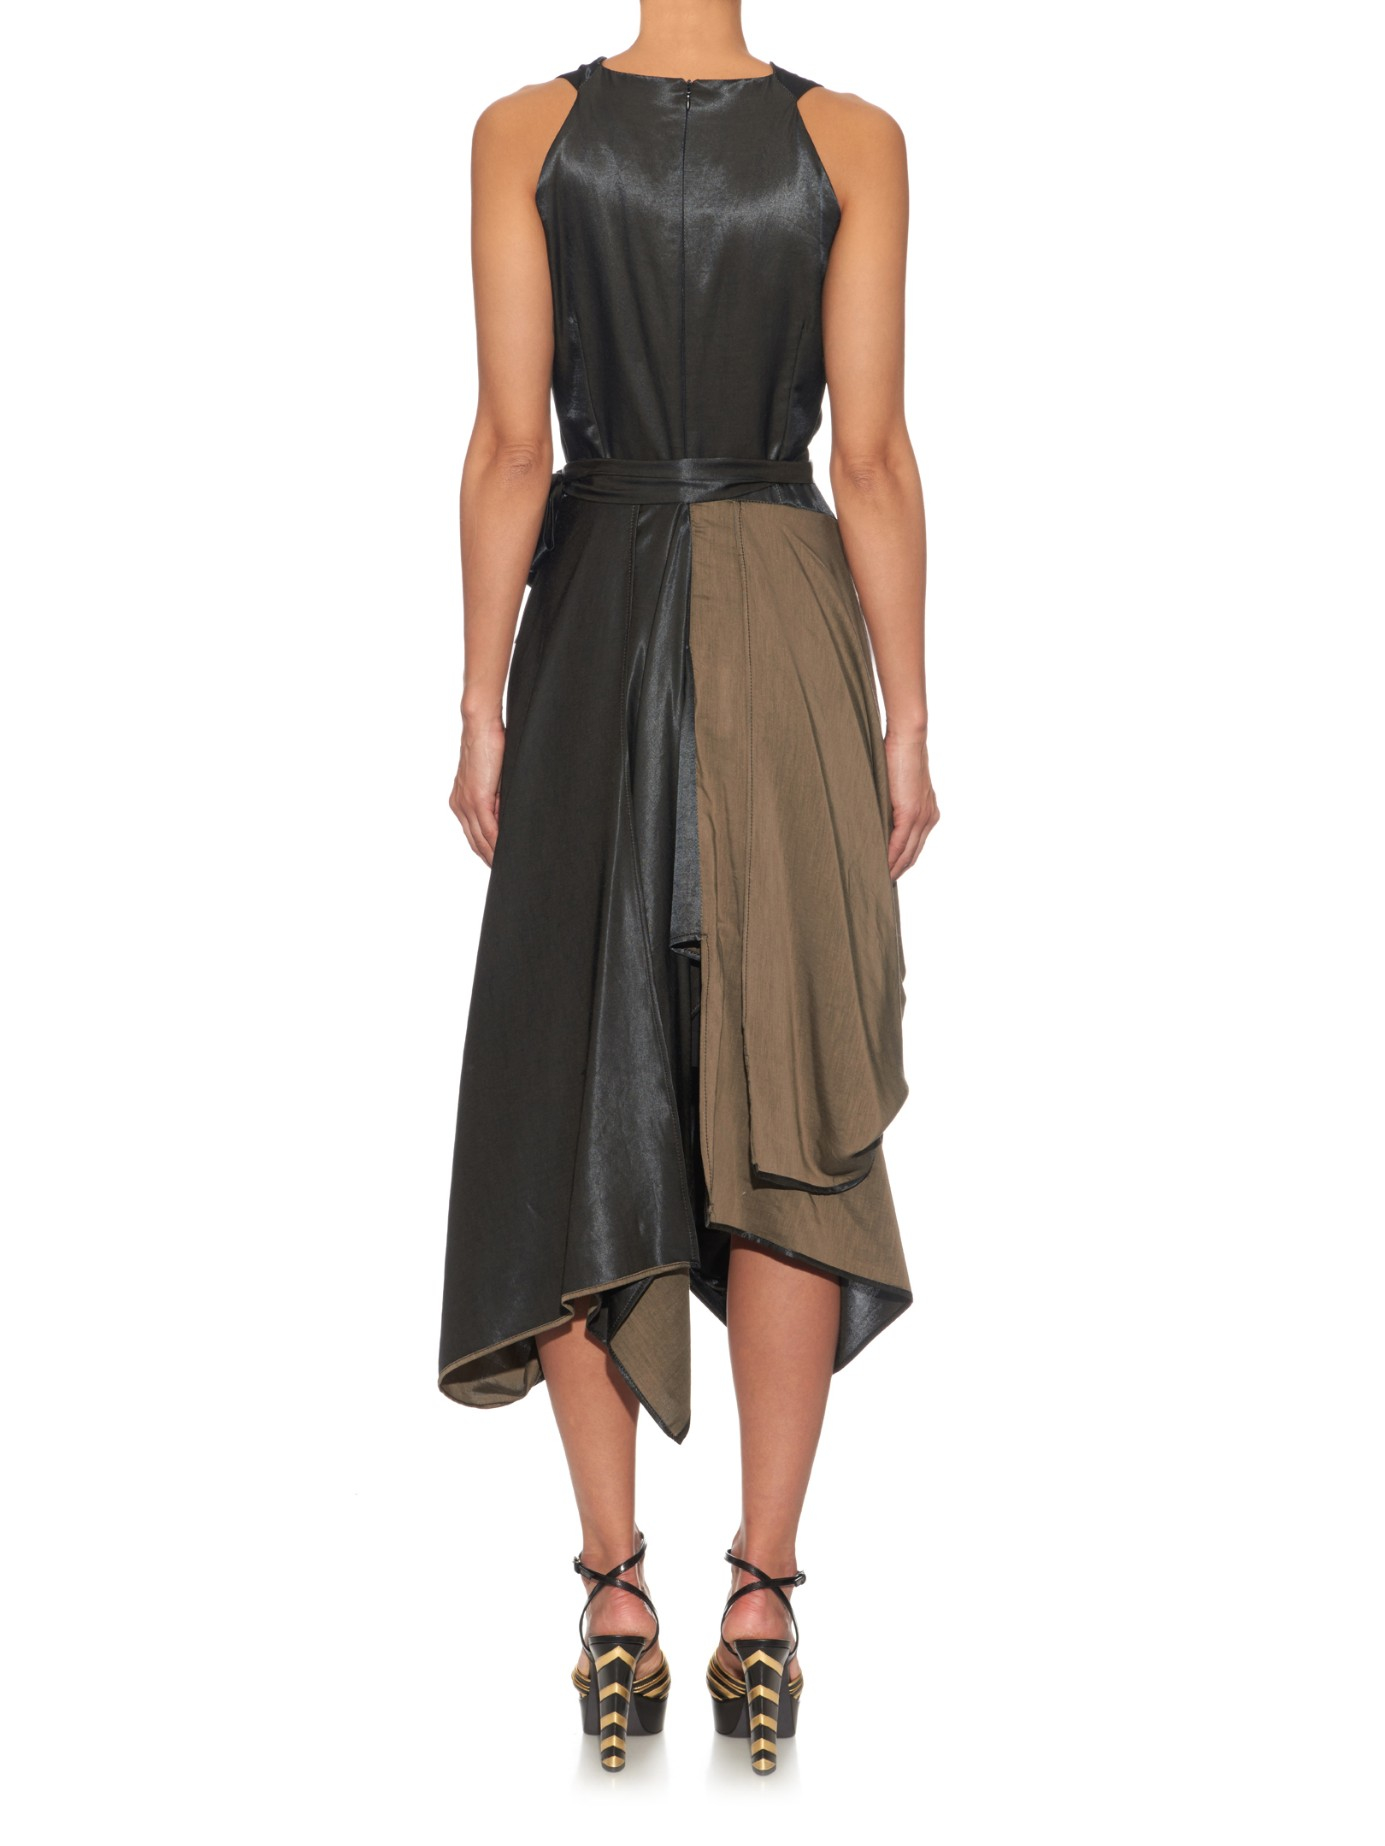 Vivienne Westwood Anglomania Eight Draped-Satin Dress in Metallic - Lyst